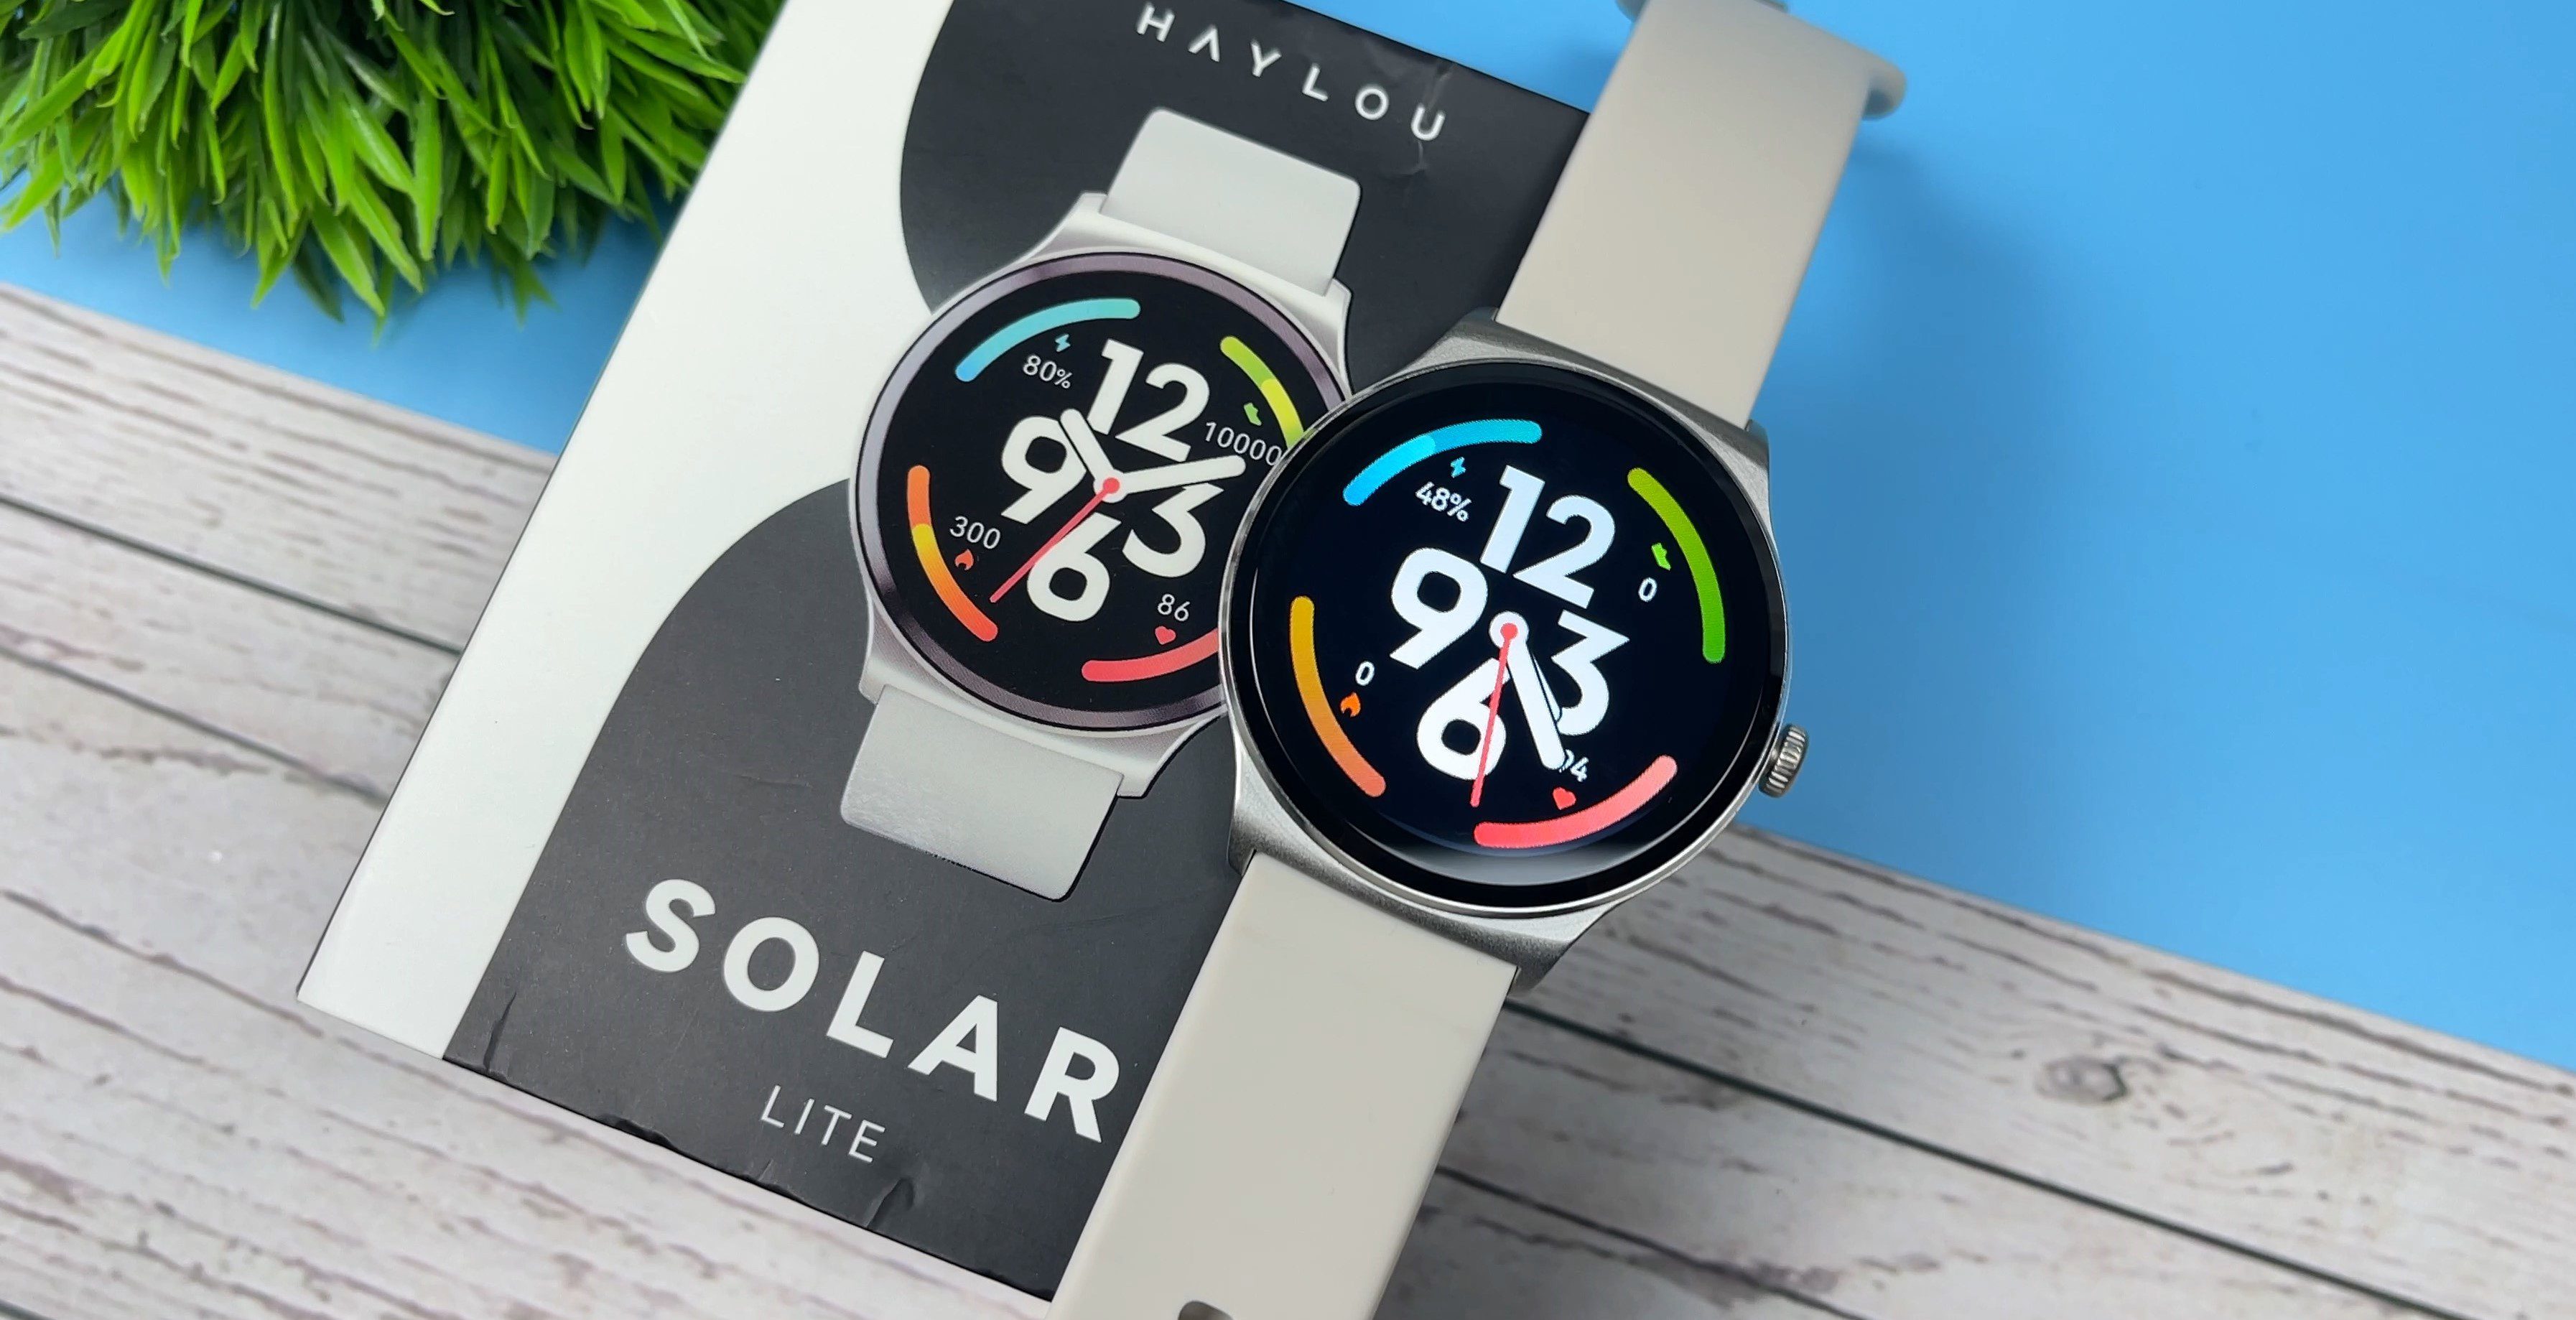 Haylou Solar Lite Review: The Perfect Blend of Functionality, Style, and Affordability